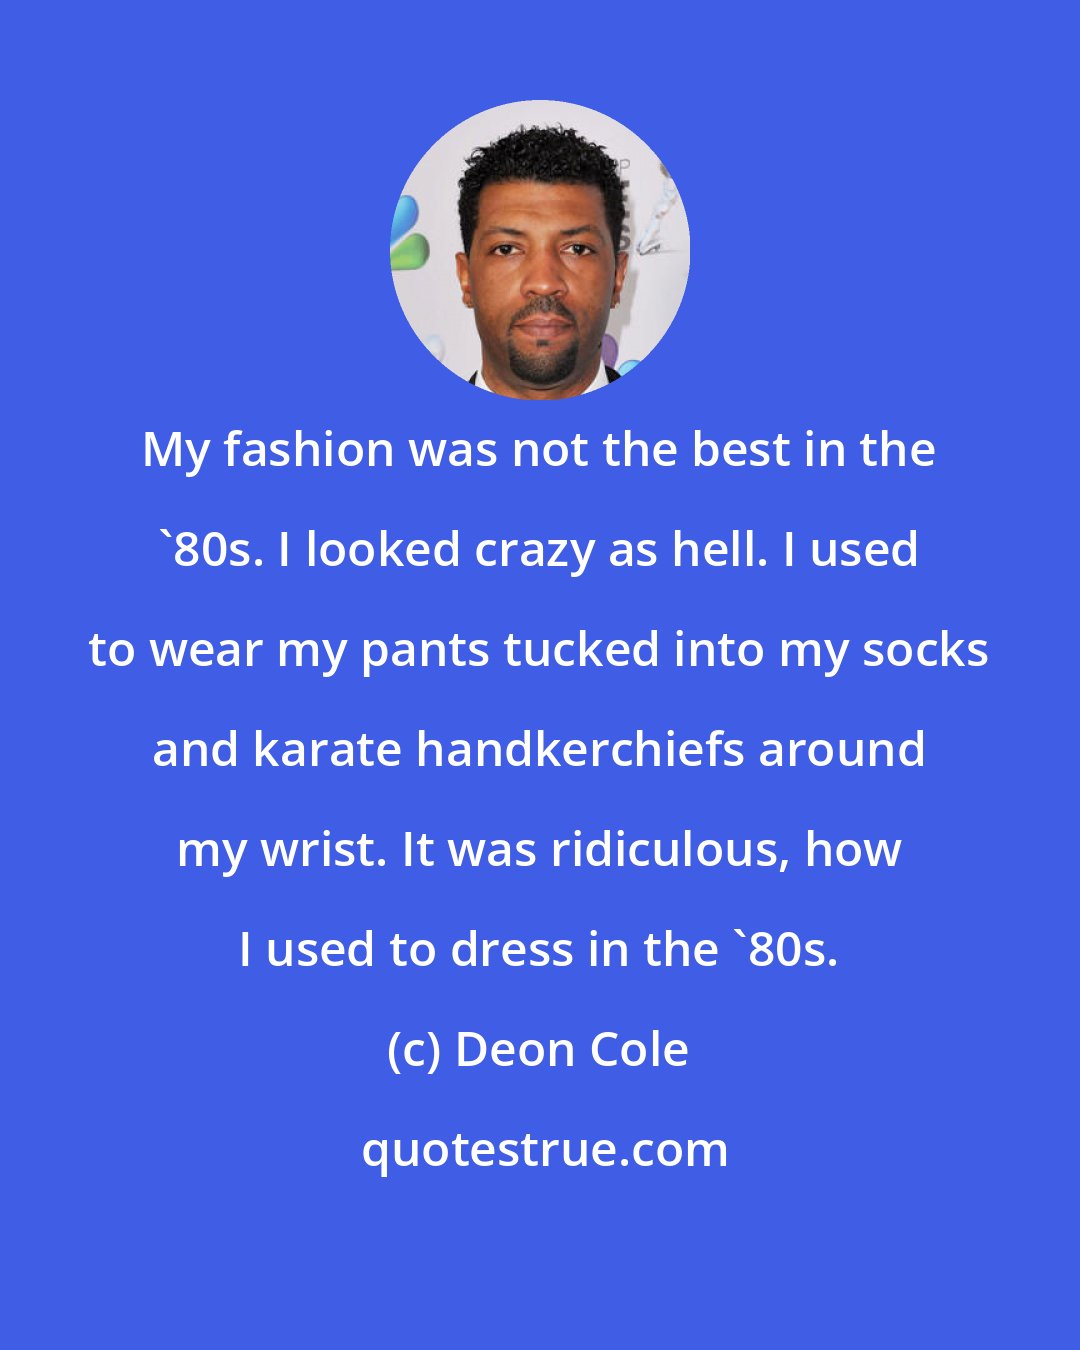 Deon Cole: My fashion was not the best in the '80s. I looked crazy as hell. I used to wear my pants tucked into my socks and karate handkerchiefs around my wrist. It was ridiculous, how I used to dress in the '80s.